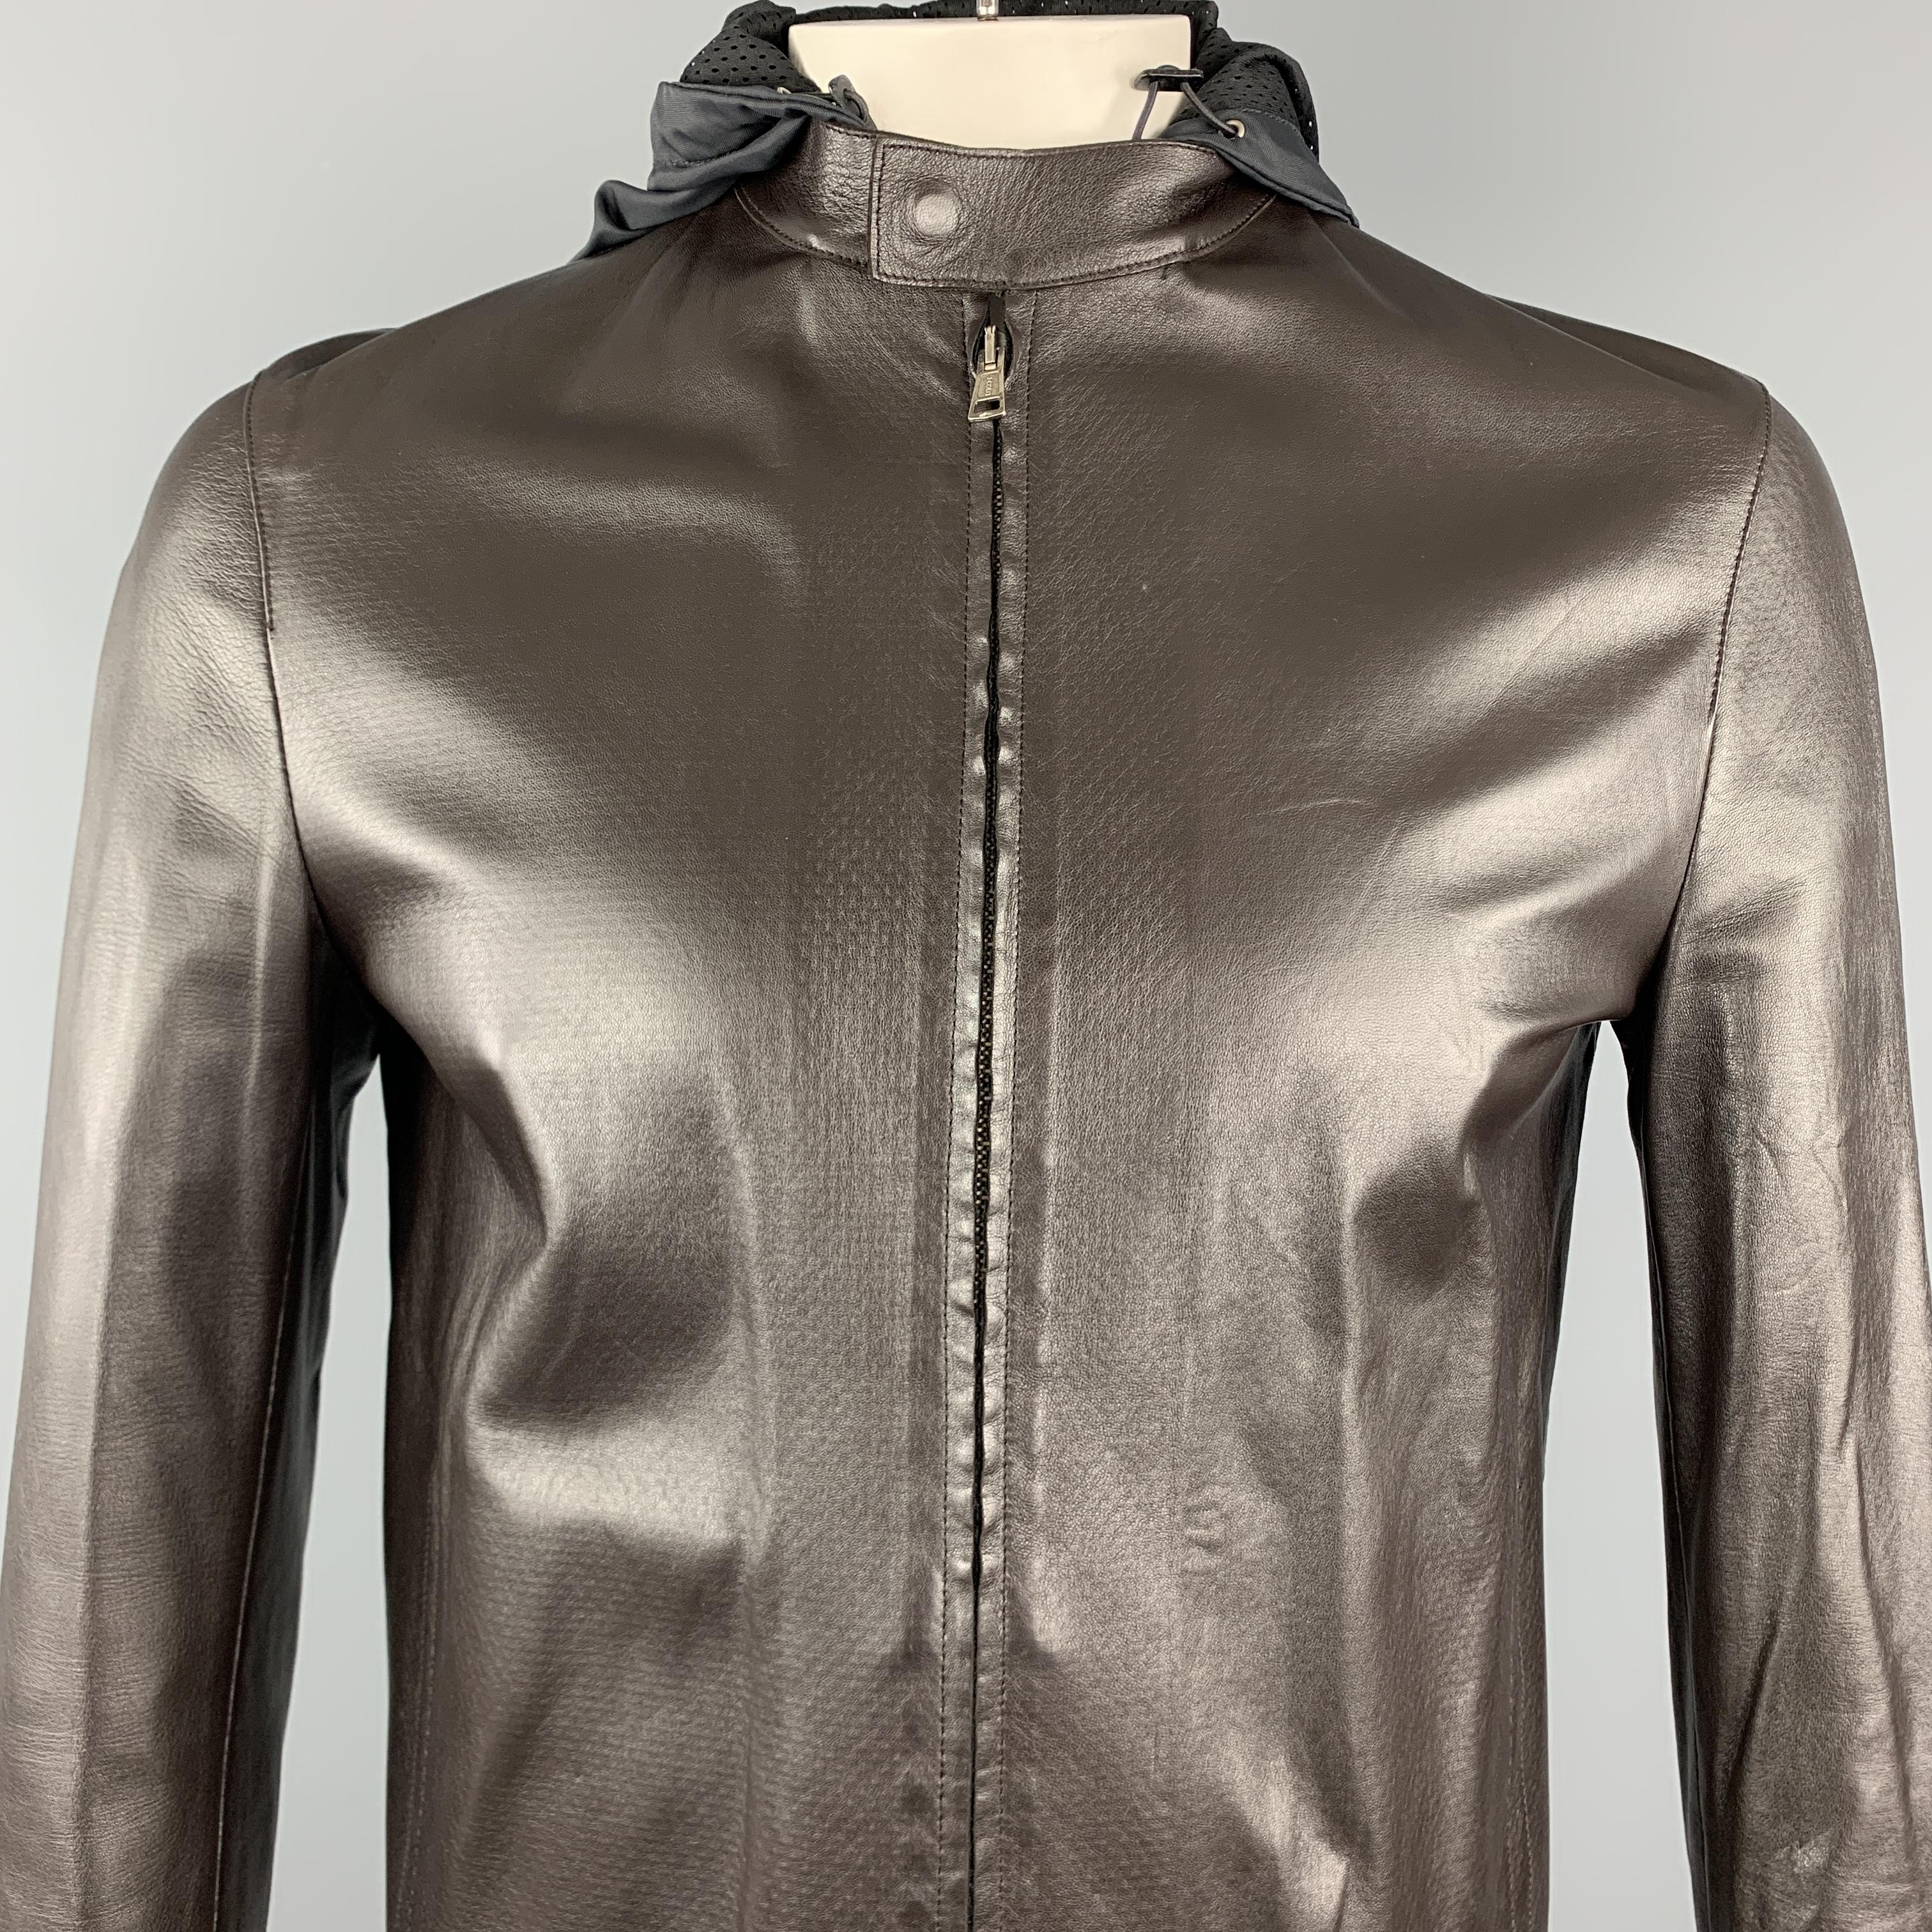 NEIL BARRETT motorcycle style jacket comes in light weight brown leather with mesh liner, tab collar, slit pockets, zip cuffs, and zip off hood. Made in Italy.

Excellent Pre-Owned Condition.
Marked: M

Measurements:

Shoulder: 17 in.
Chest: 44